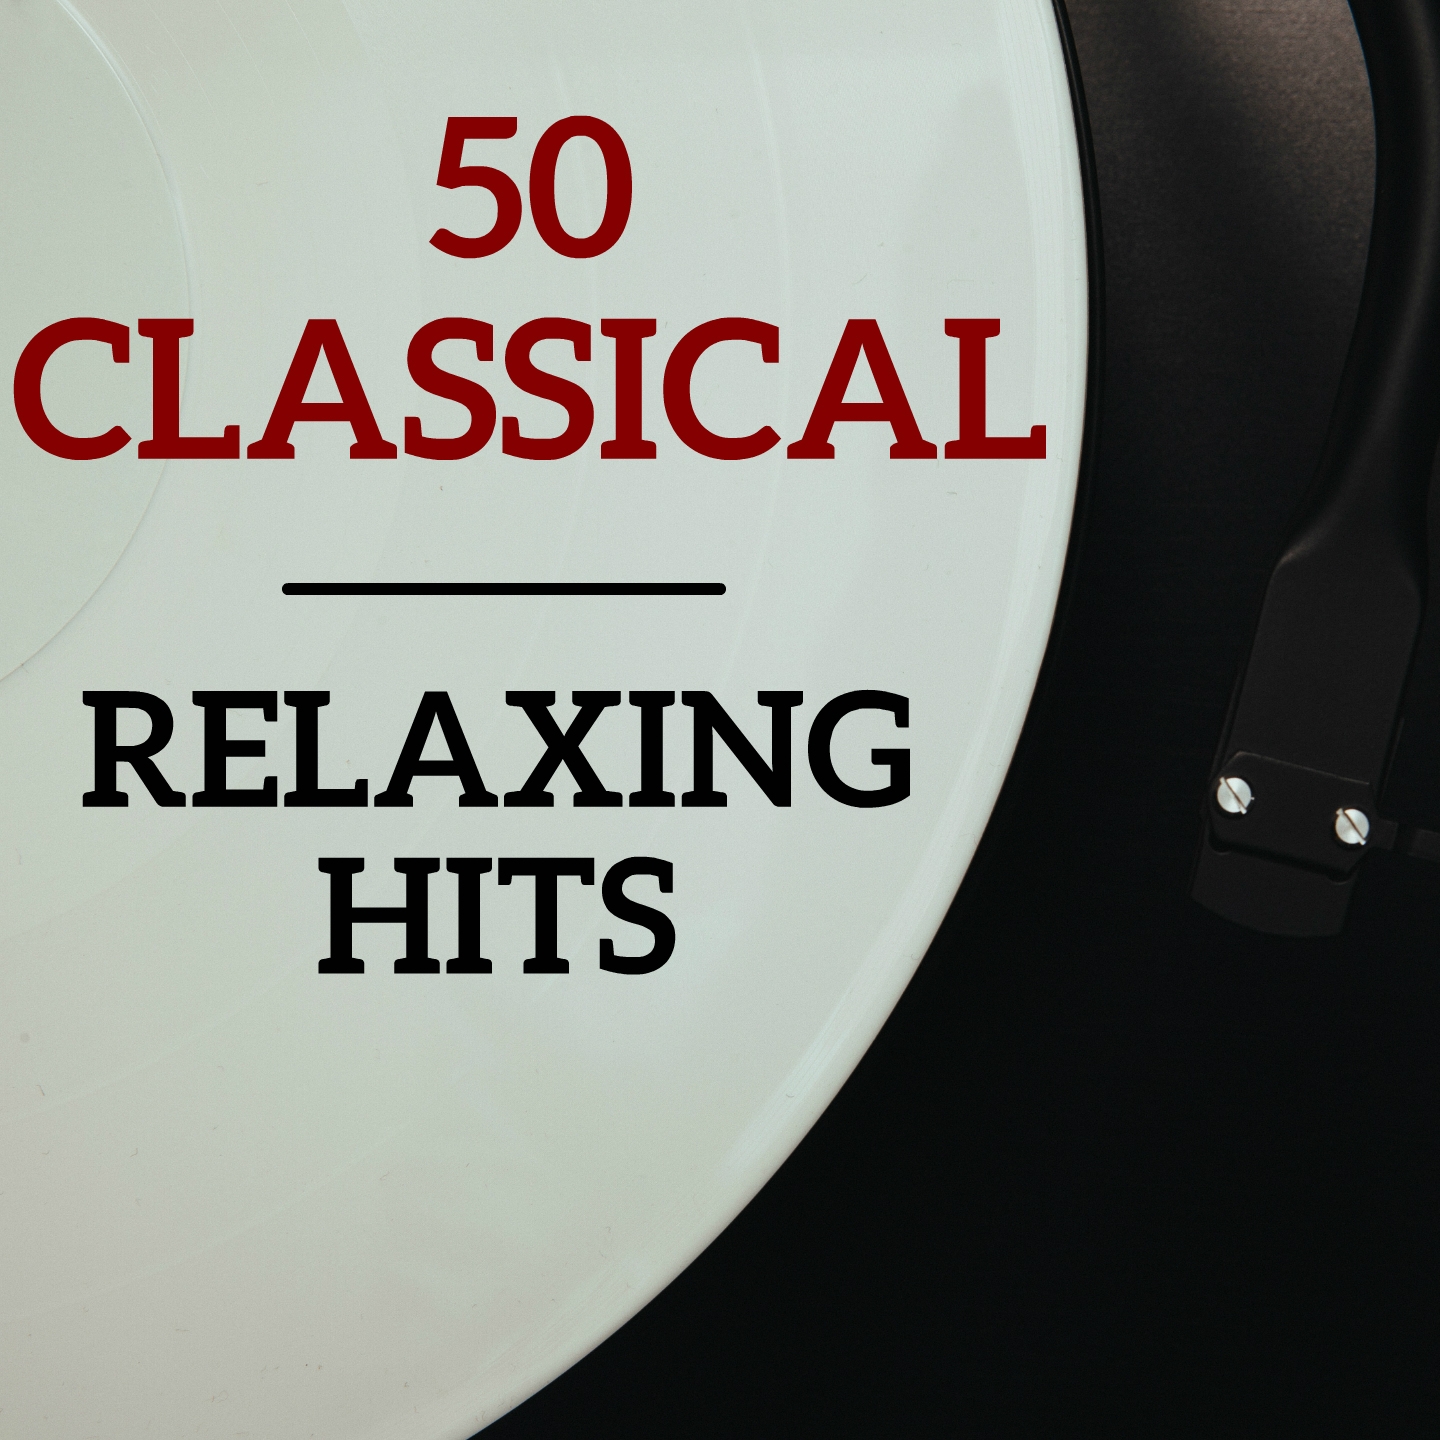 50 classical relaxing hits